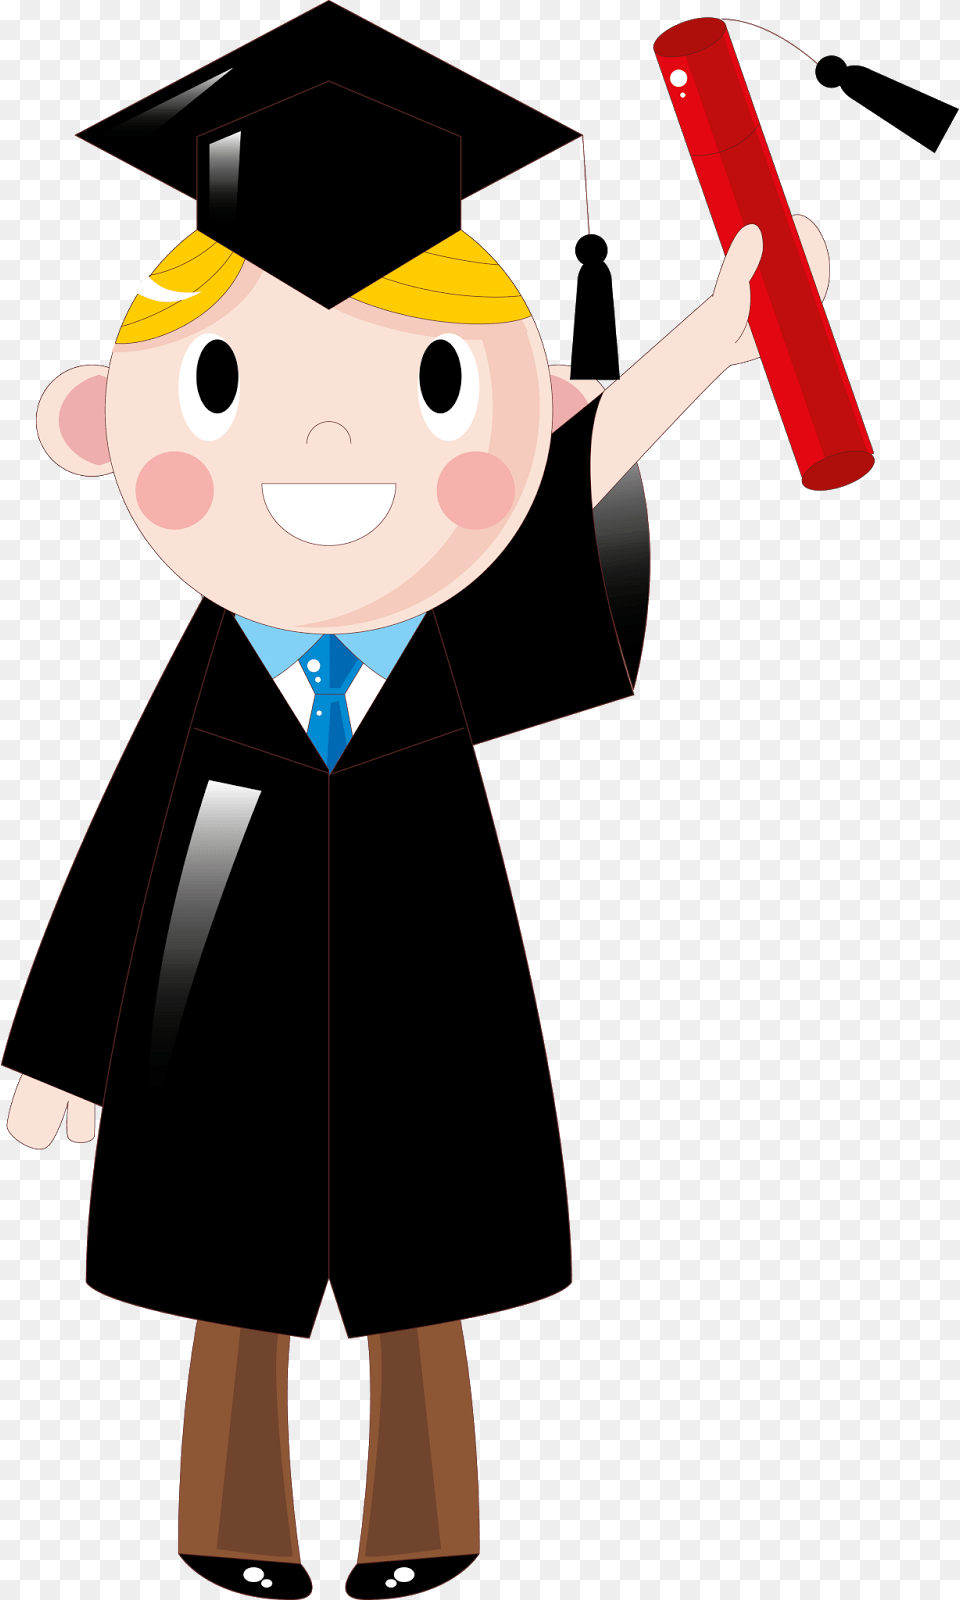 Cartoon Diploma Free Transparent Images With Cliparts Vectors, Graduation, People, Person, Adult Png